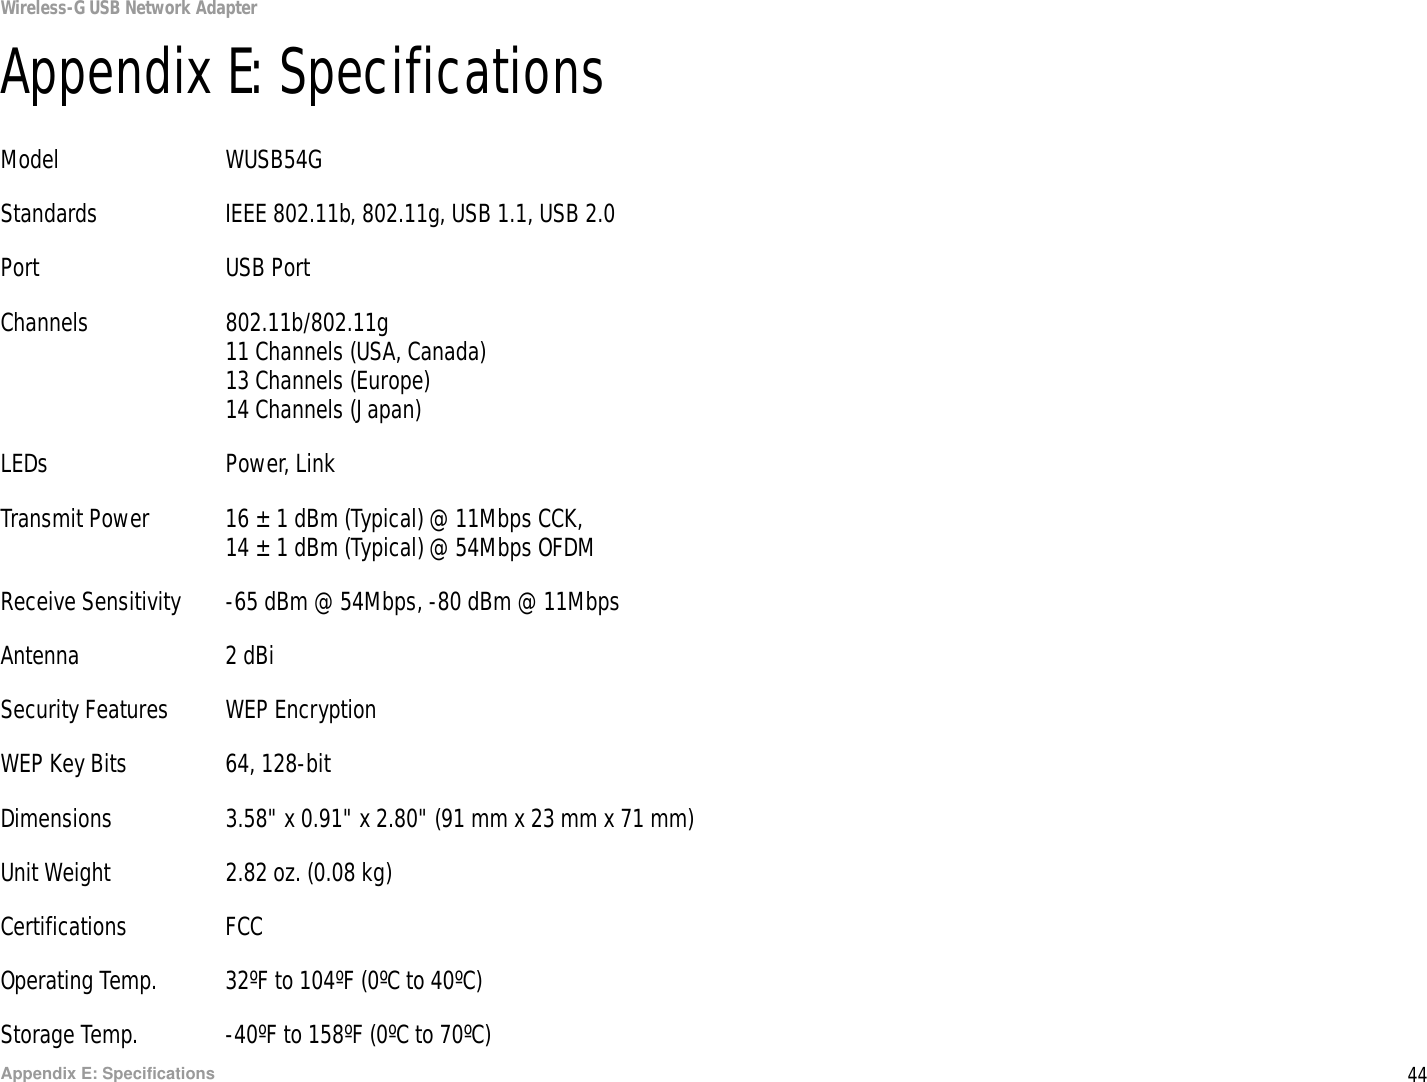 44Appendix E: SpecificationsWireless-G USB Network AdapterAppendix E: SpecificationsModel WUSB54GStandards IEEE 802.11b, 802.11g, USB 1.1, USB 2.0Port USB PortChannels 802.11b/802.11g11 Channels (USA, Canada)13 Channels (Europe)14 Channels (Japan)LEDs Power, LinkTransmit Power 16 ± 1 dBm (Typical) @ 11Mbps CCK,14 ± 1 dBm (Typical) @ 54Mbps OFDMReceive Sensitivity -65 dBm @ 54Mbps, -80 dBm @ 11MbpsAntenna 2 dBiSecurity Features WEP EncryptionWEP Key Bits 64, 128-bitDimensions  3.58&quot; x 0.91&quot; x 2.80&quot; (91 mm x 23 mm x 71 mm)Unit Weight 2.82 oz. (0.08 kg)Certifications FCCOperating Temp. 32ºF to 104ºF (0ºC to 40ºC)Storage Temp. -40ºF to 158ºF (0ºC to 70ºC)